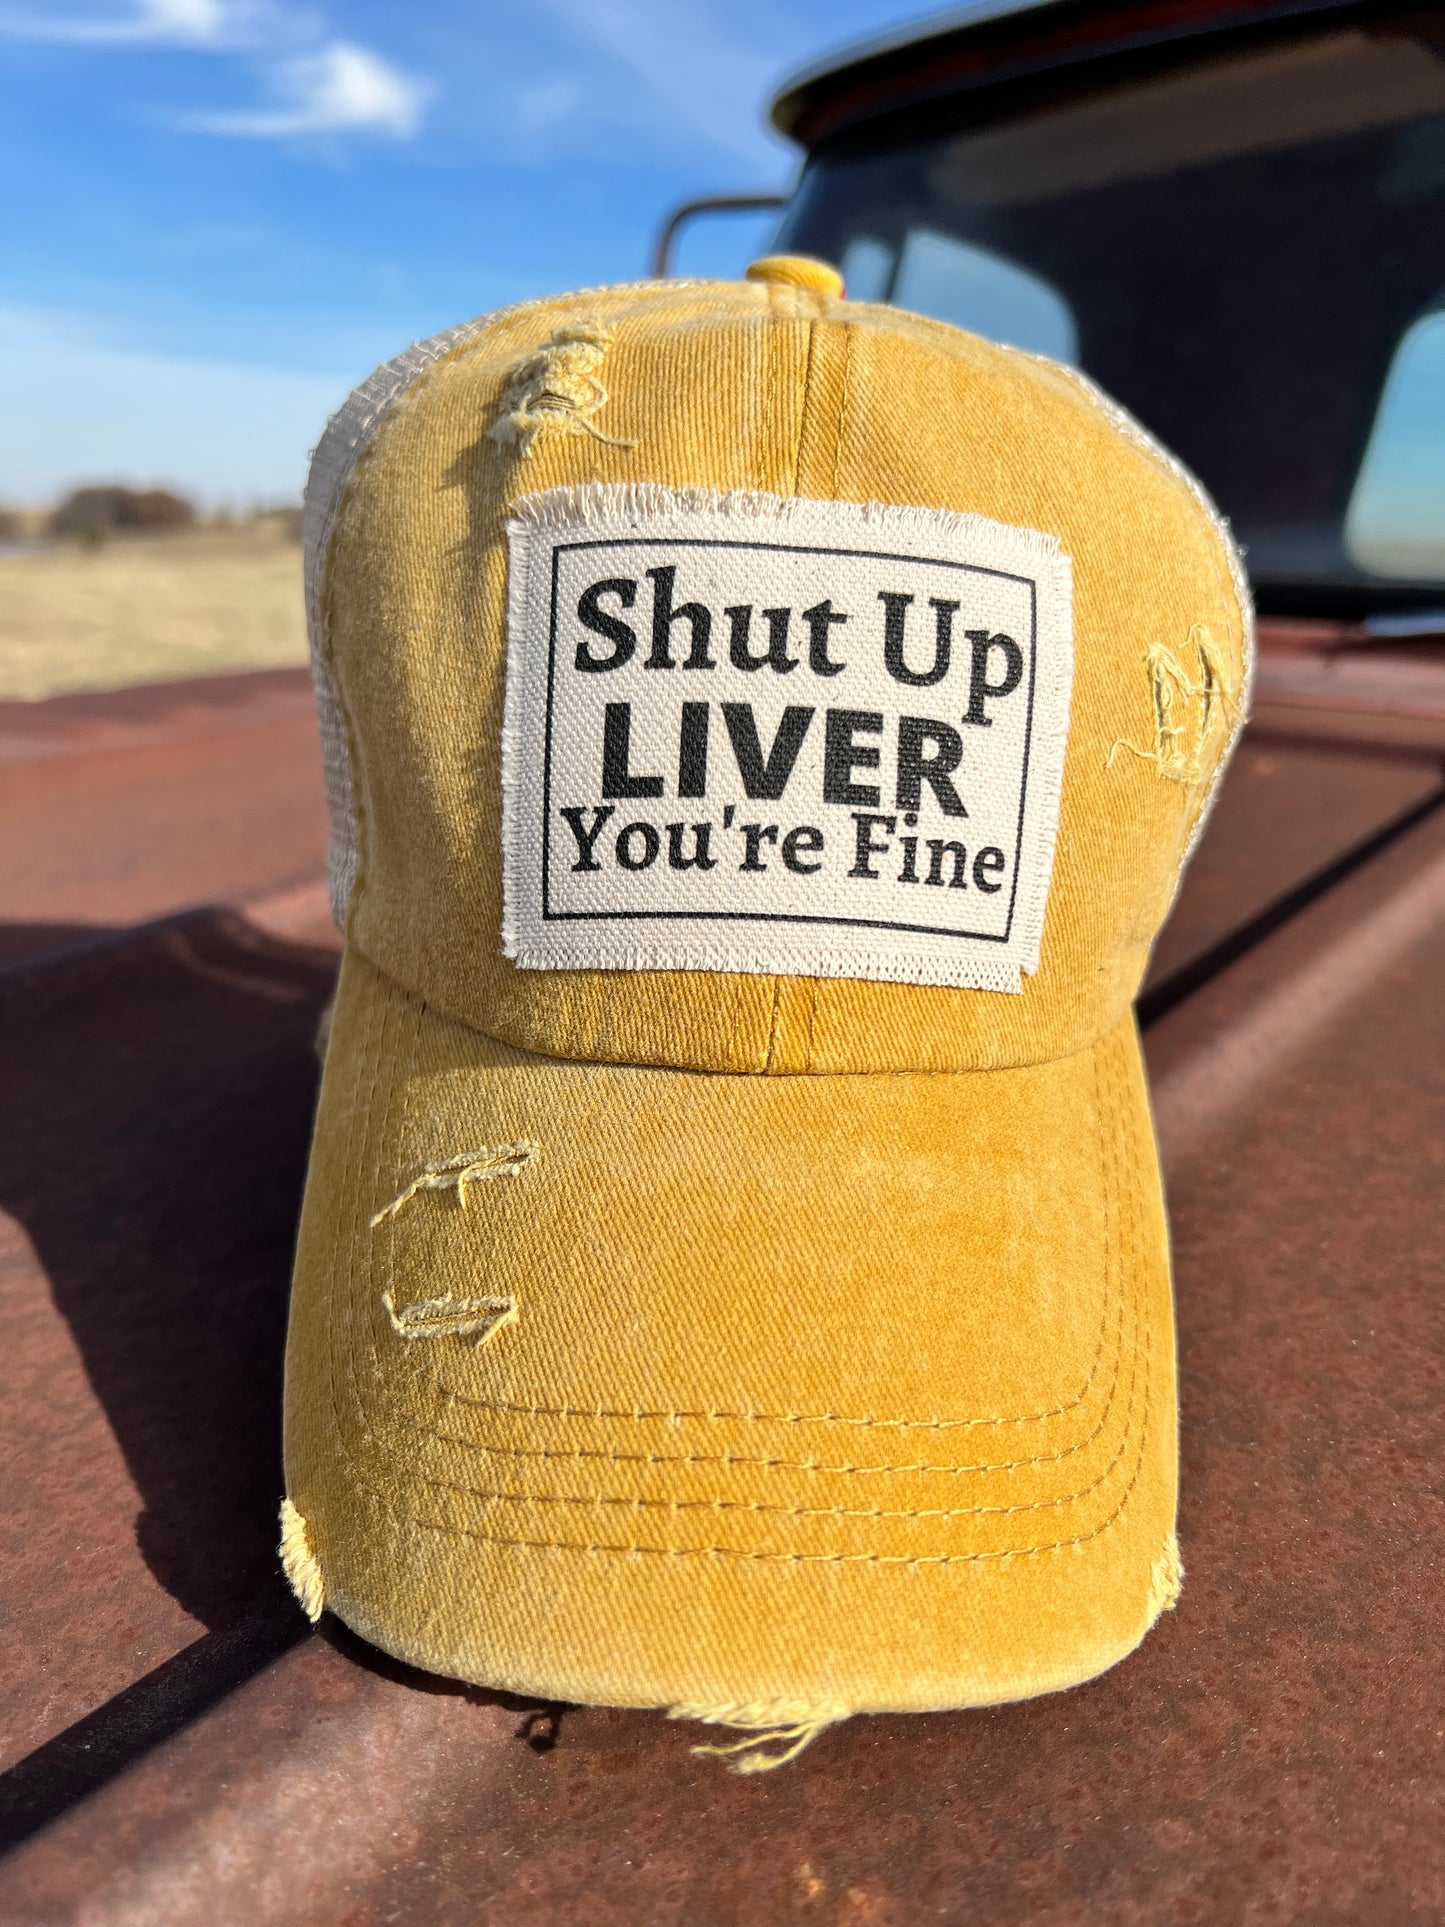 Mustard Baseball cap with material patch saying "Shut Up Liver Your Fine" 